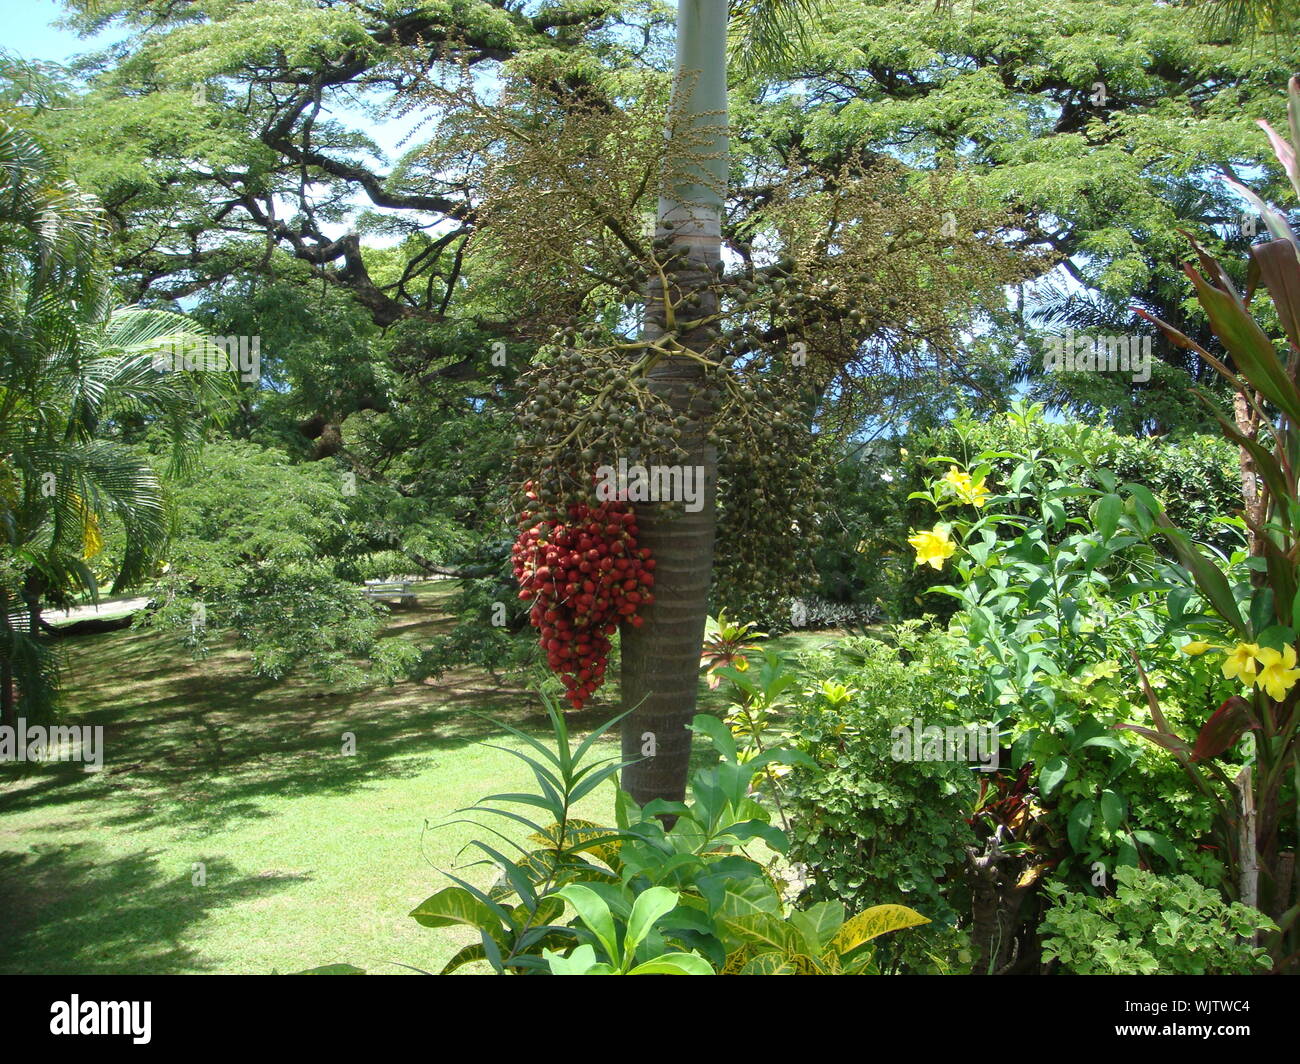 High Angle View Of Areca Nut Tree Growing At Park Stock Photo